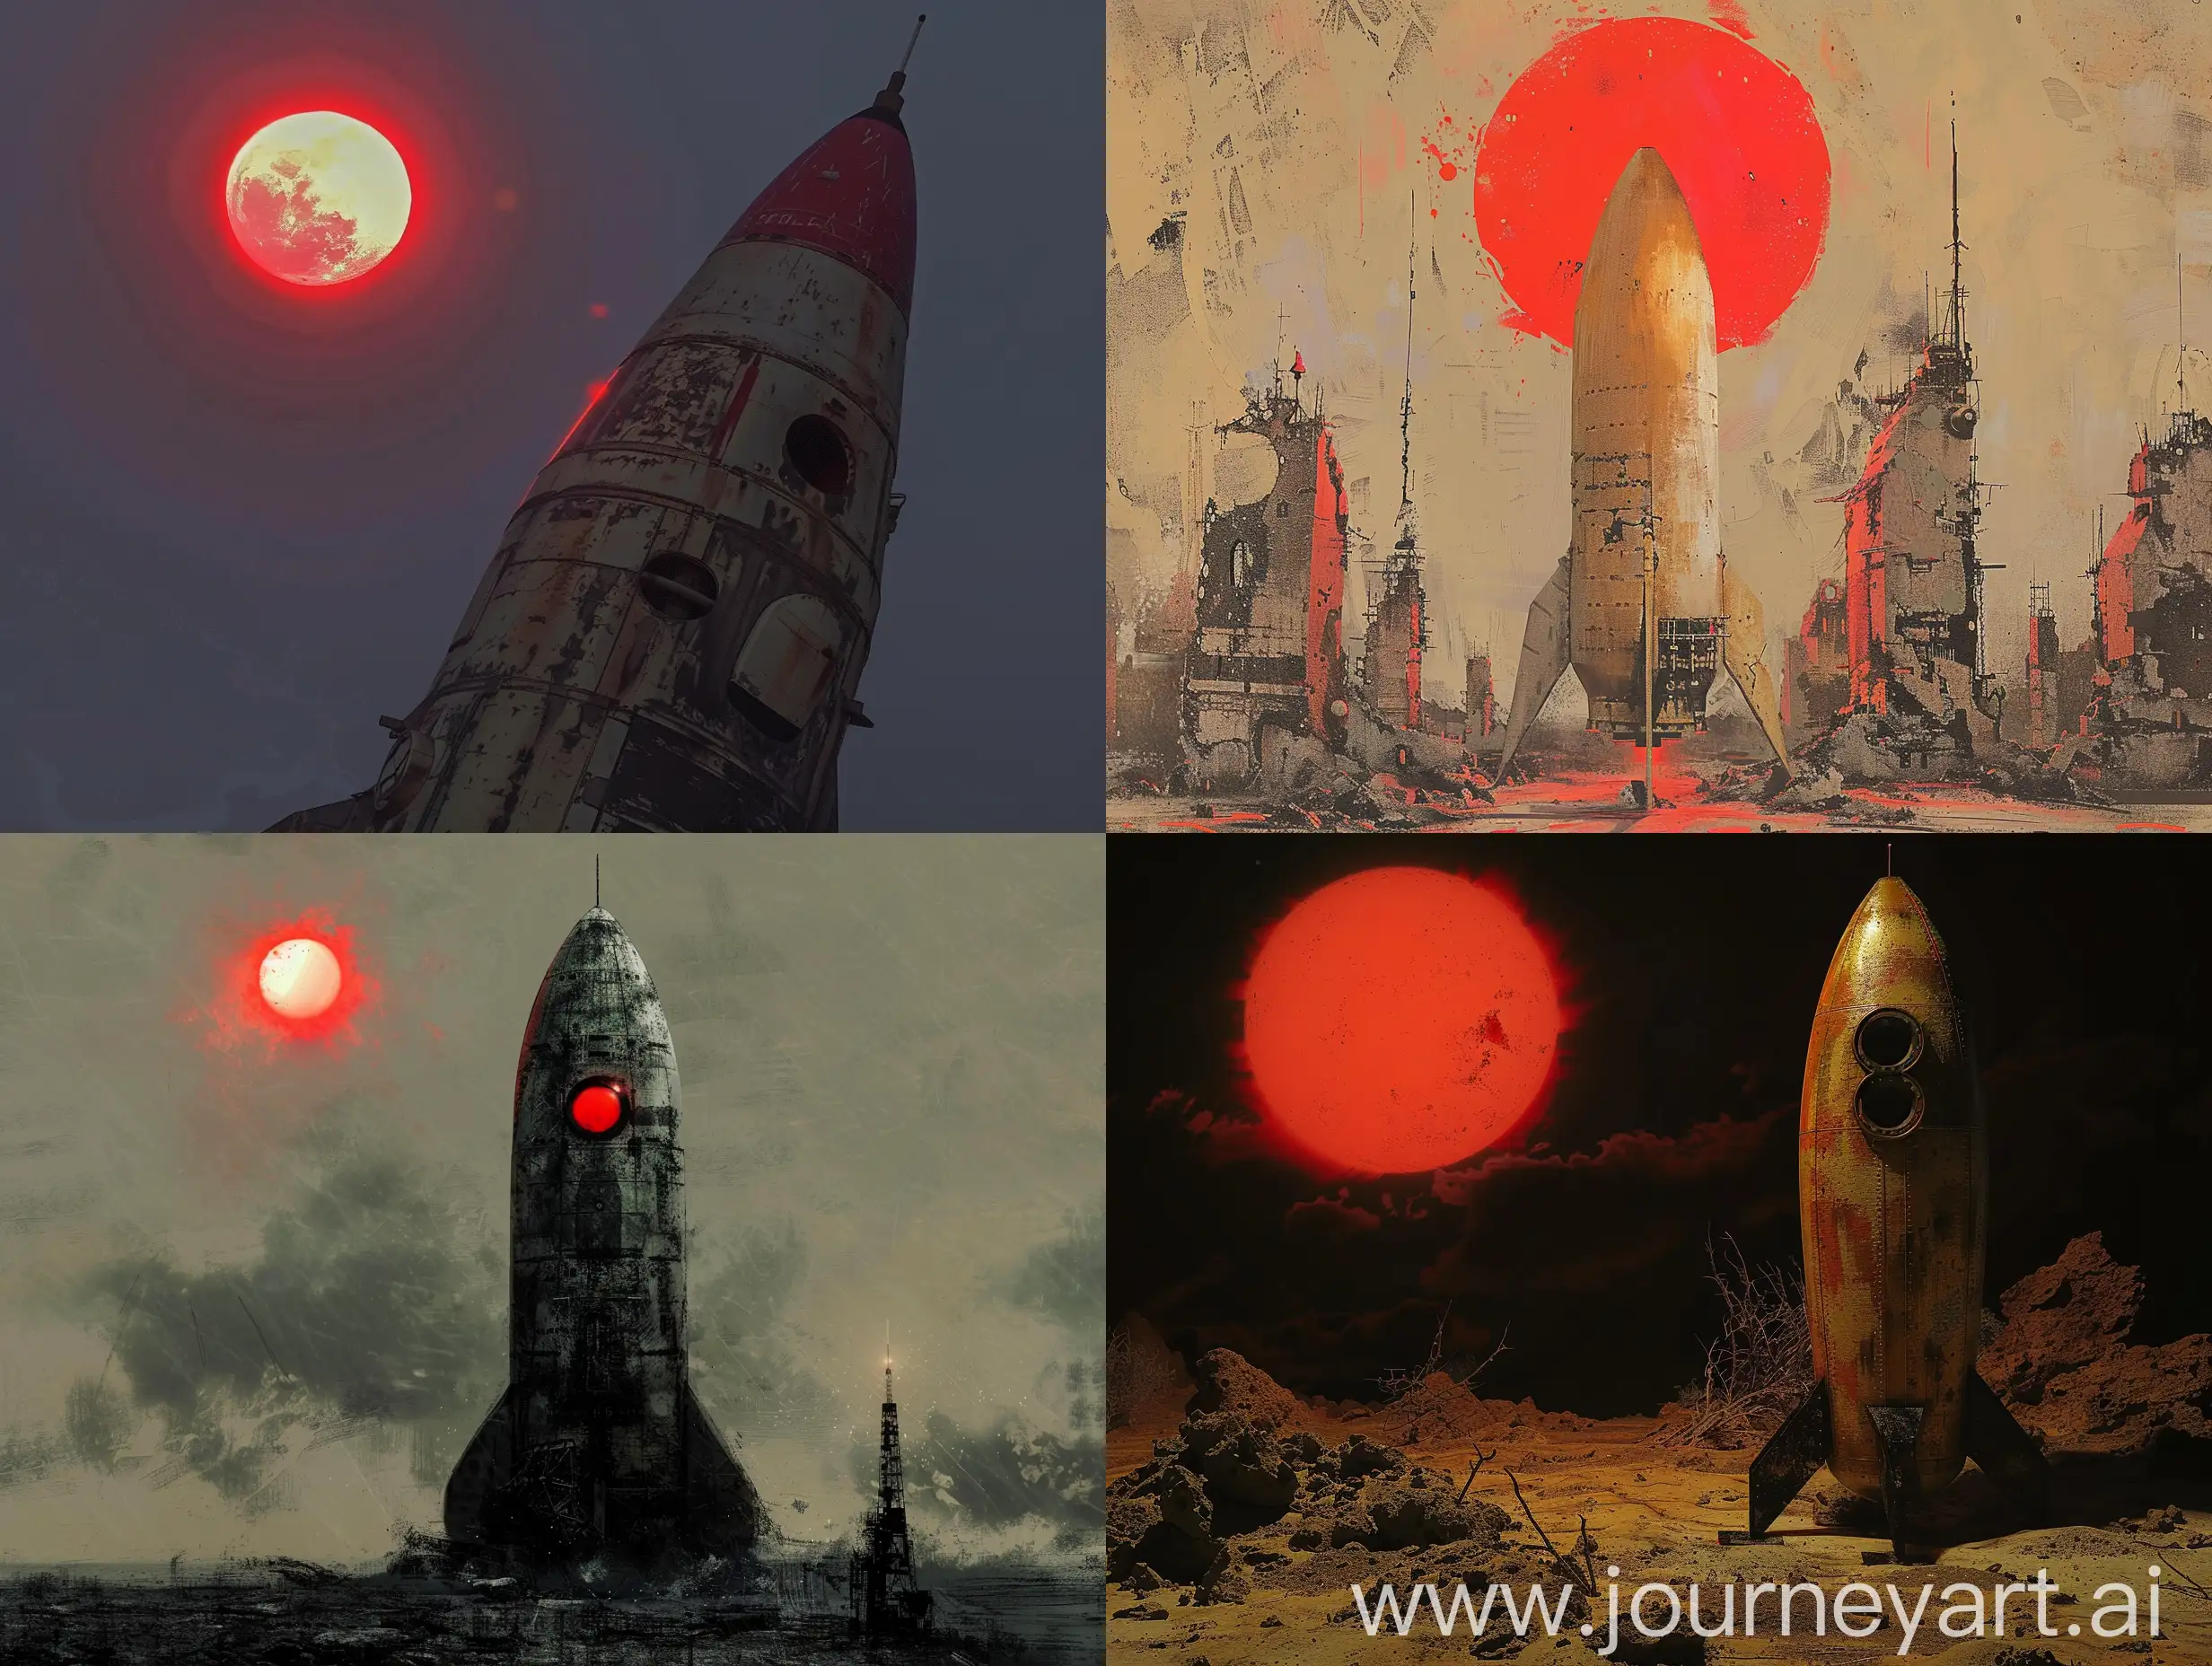 Majestic-Red-Sun-Hanging-Over-Rocket-in-the-Cosmic-Abyss